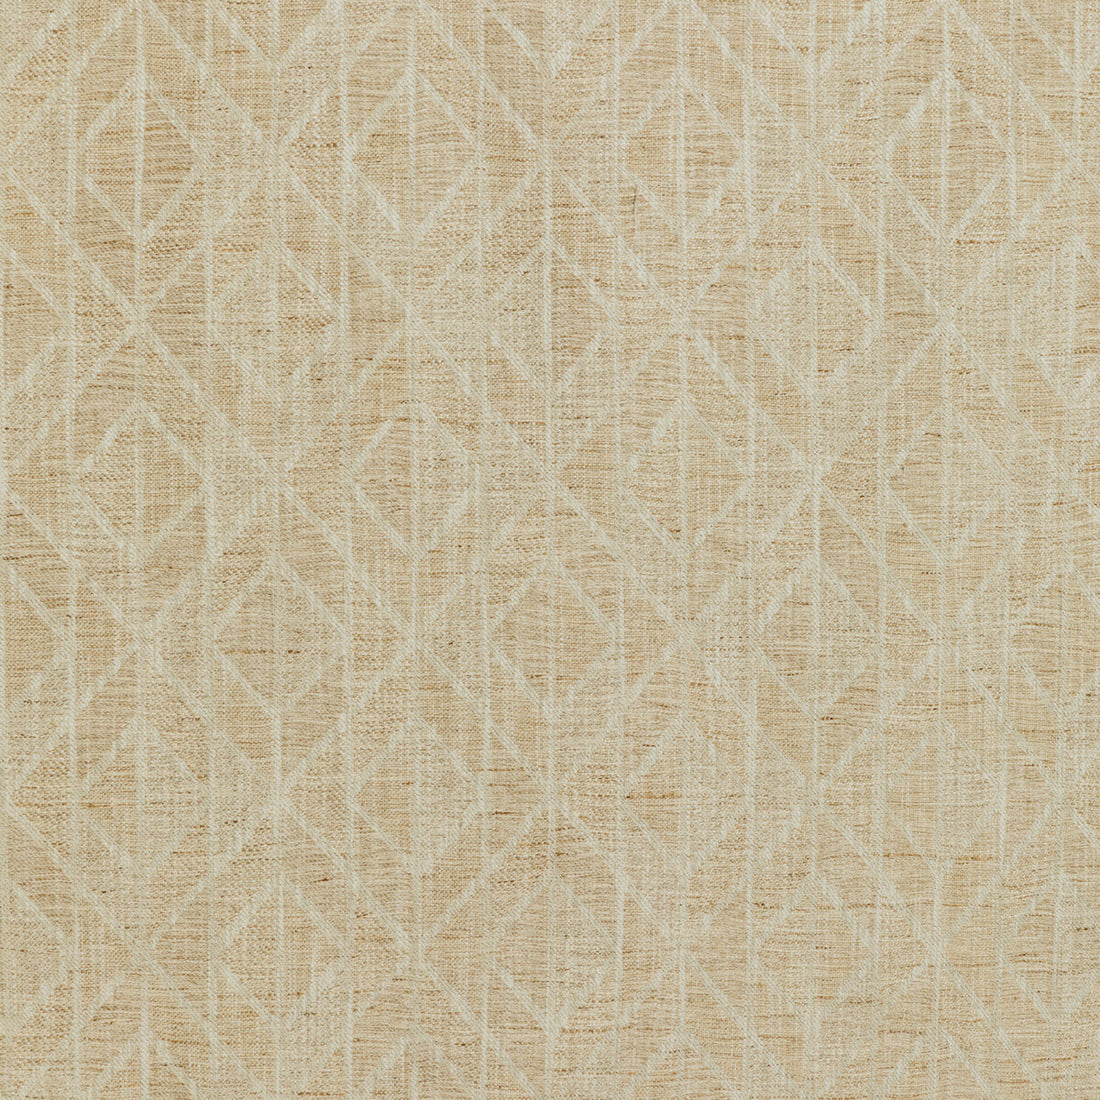 Kravet Design fabric in 36285-16 color - pattern 36285.16.0 - by Kravet Design in the Woven Colors collection